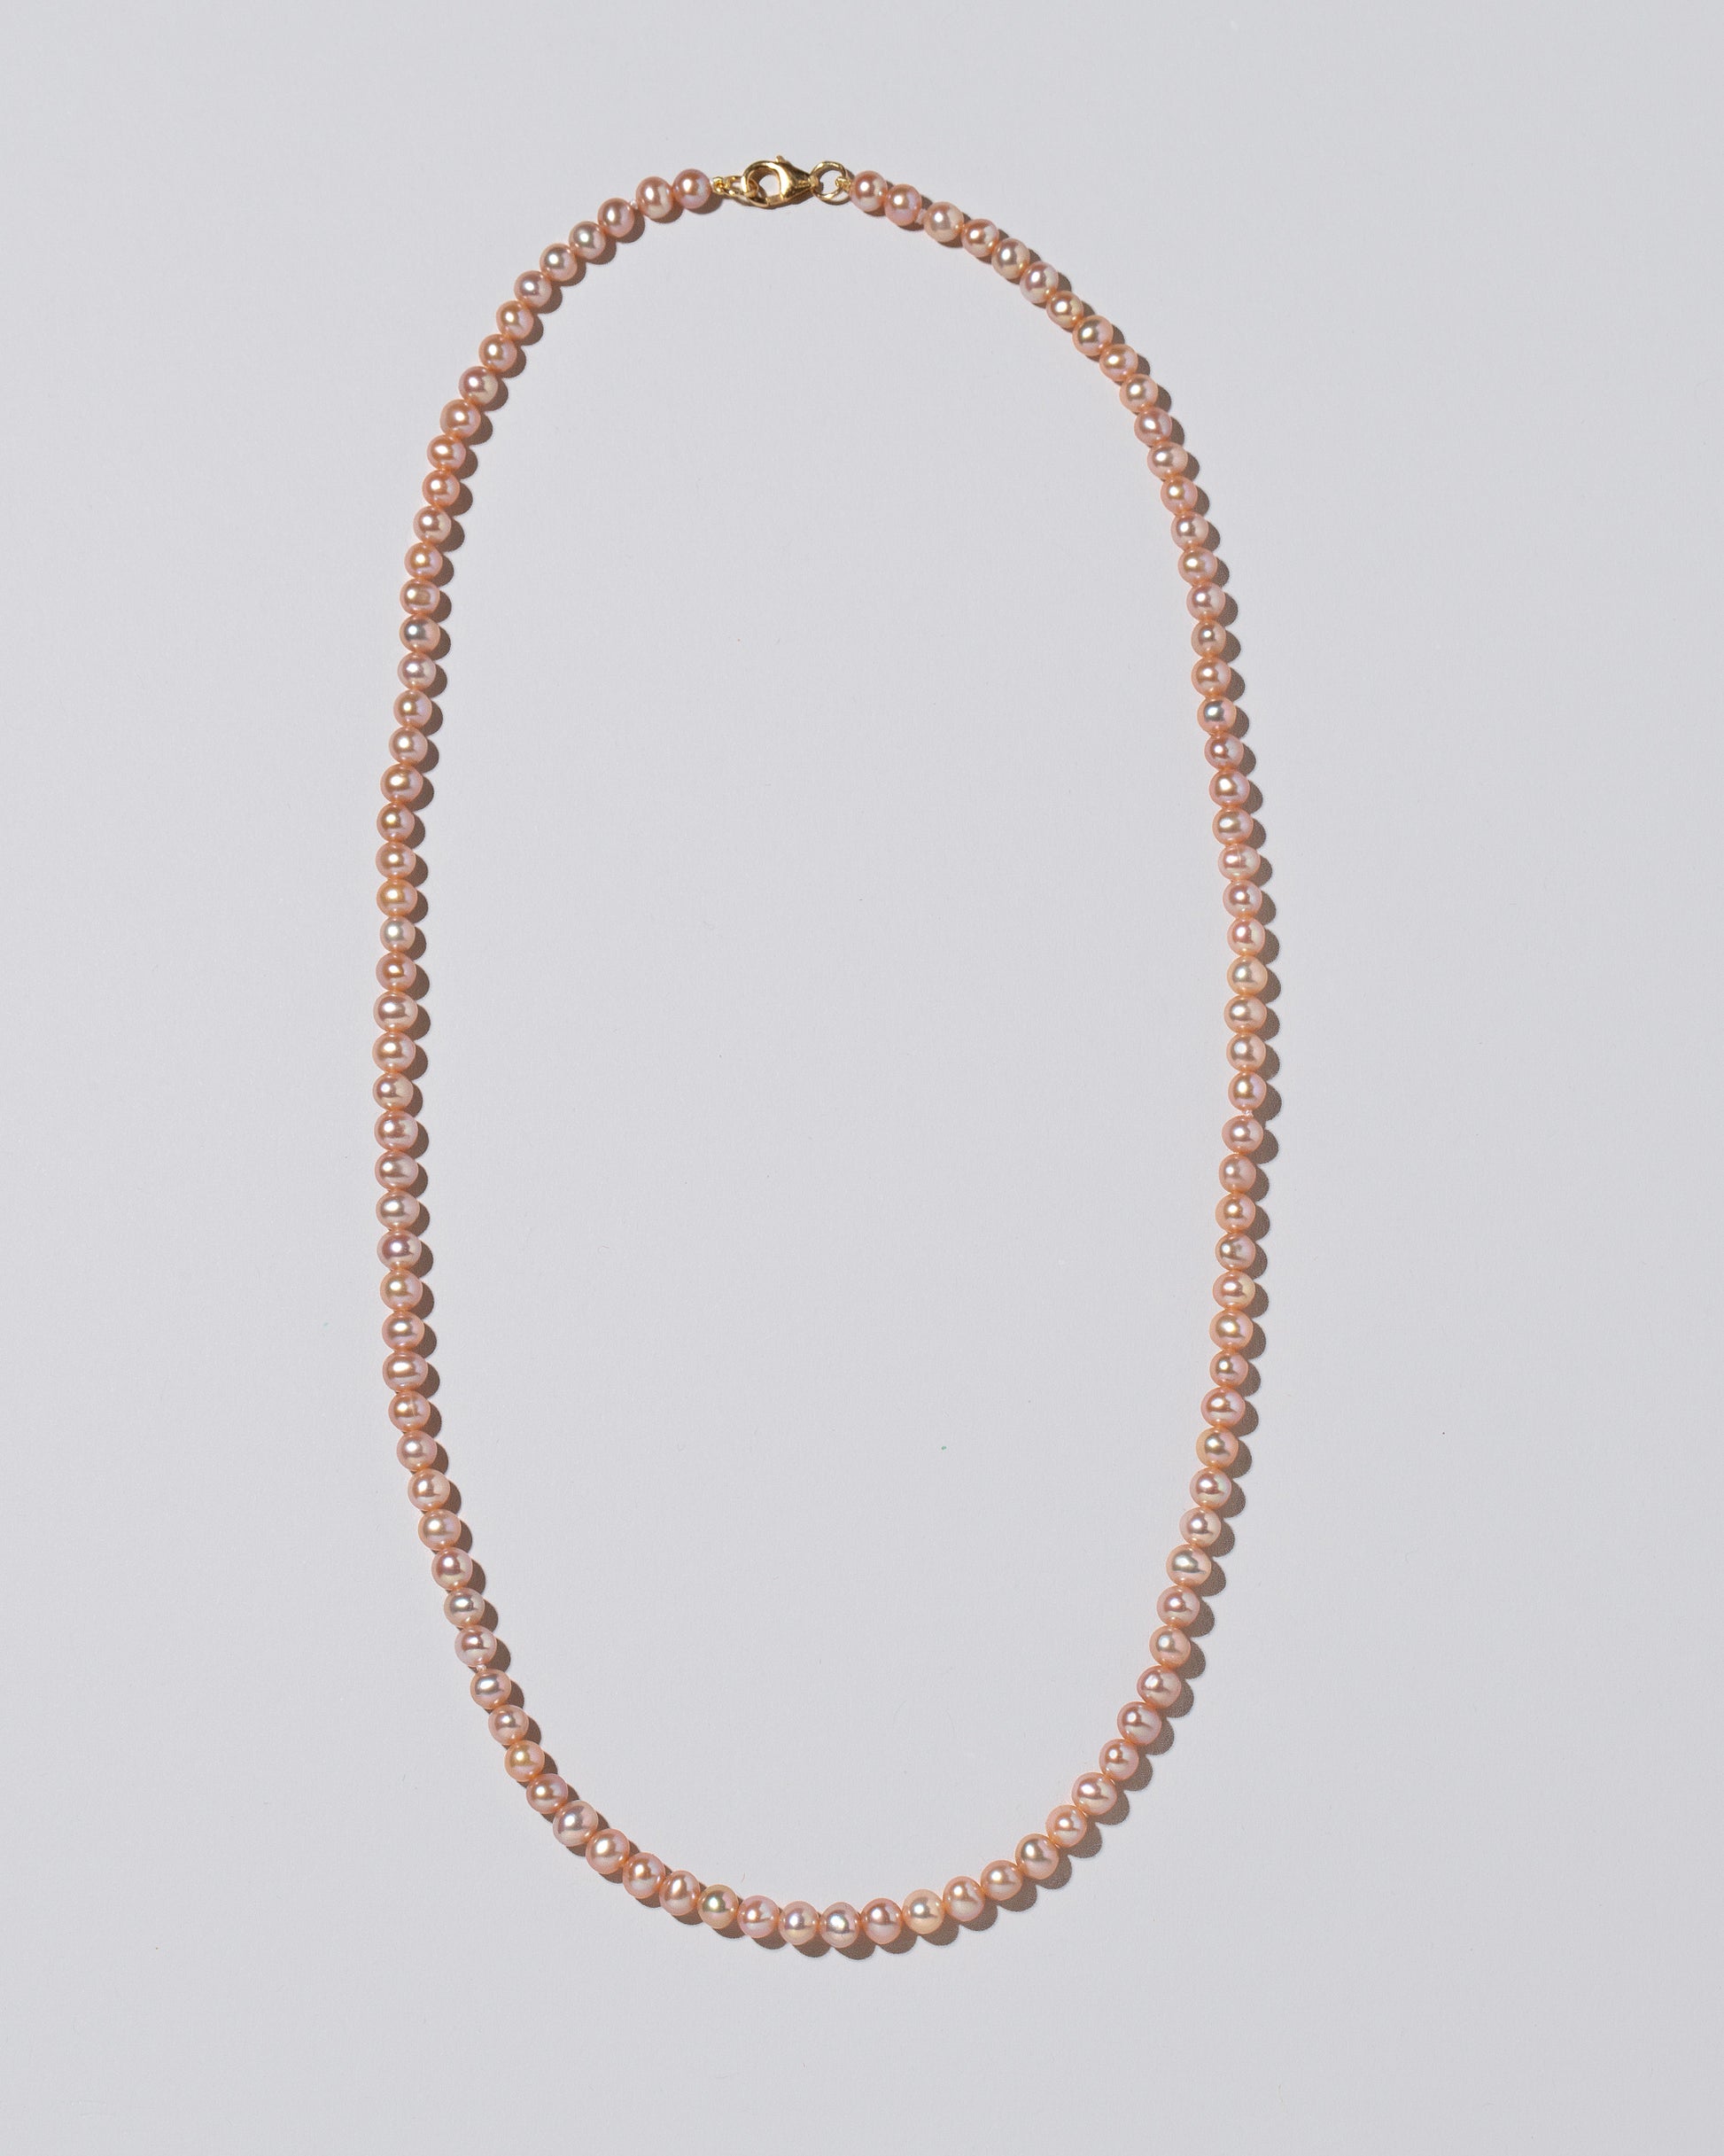 Gold Plated Oval Round Metal Copper Chain For DIY Jewelry Making